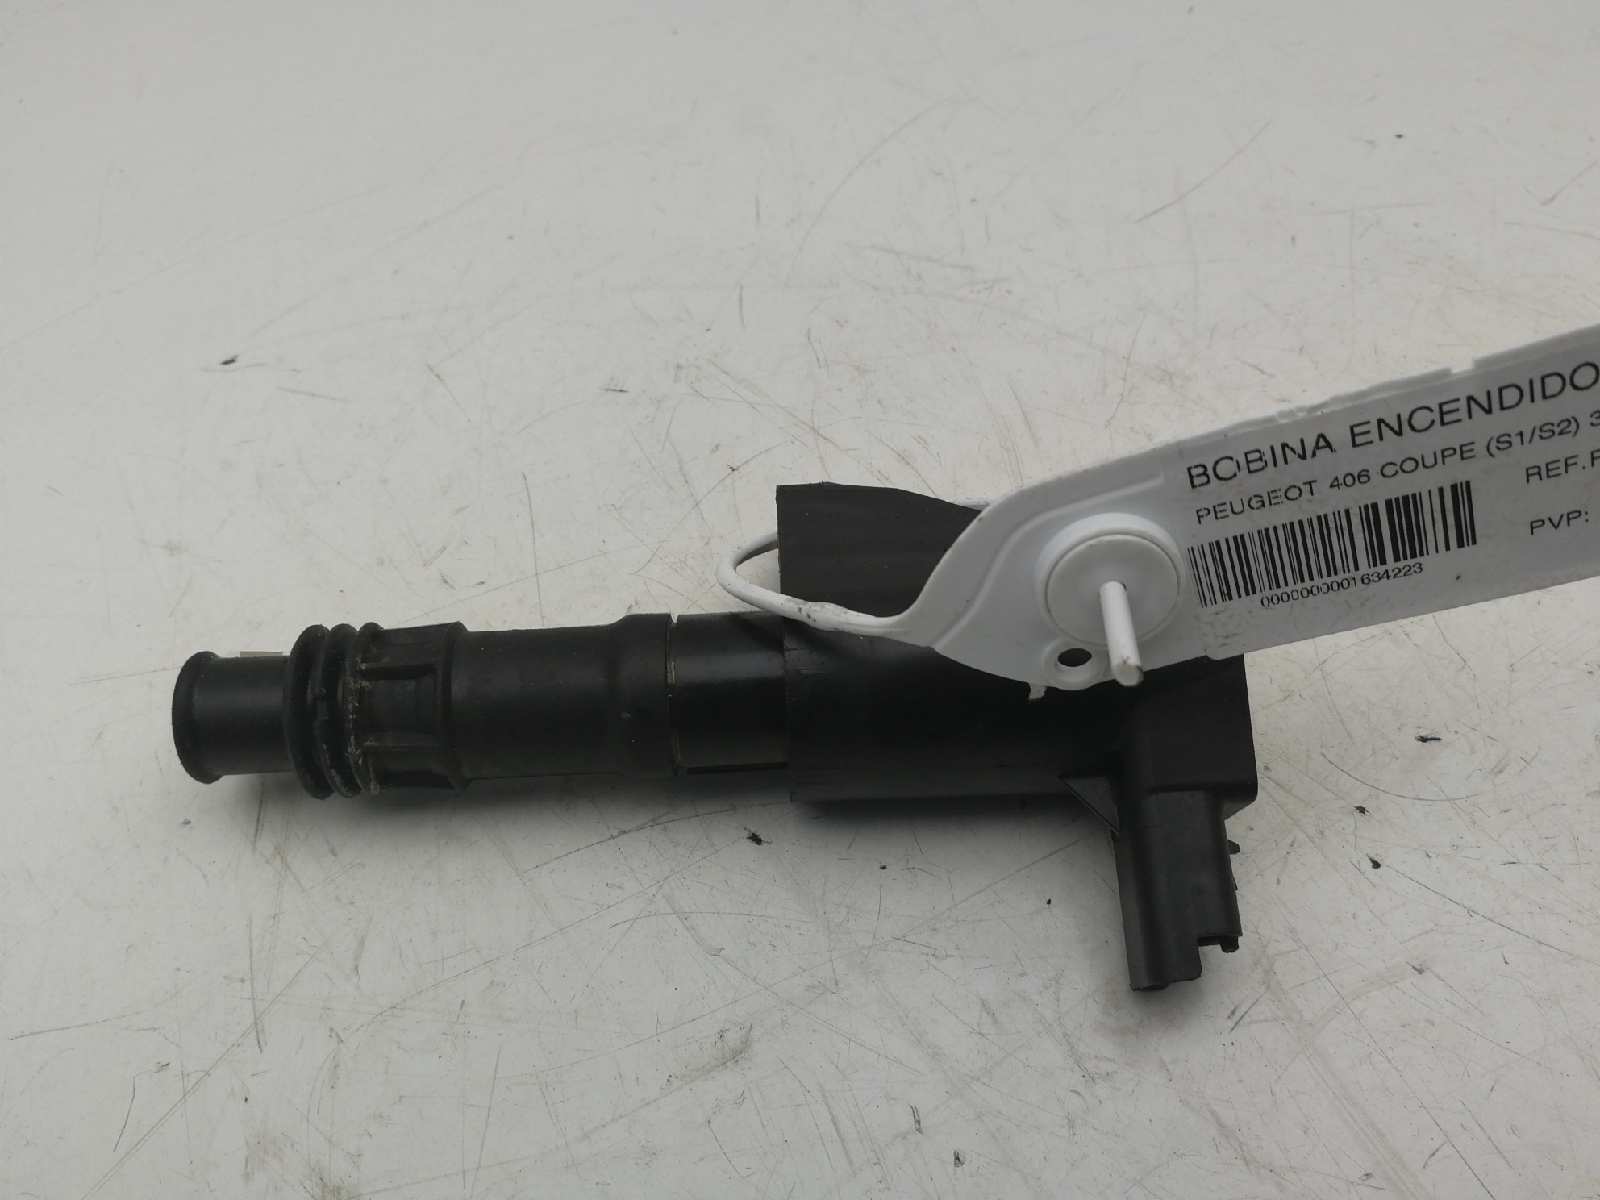 PEUGEOT 406 1 generation (1995-2004) High Voltage Ignition Coil 9663278480, 06A71 18500644